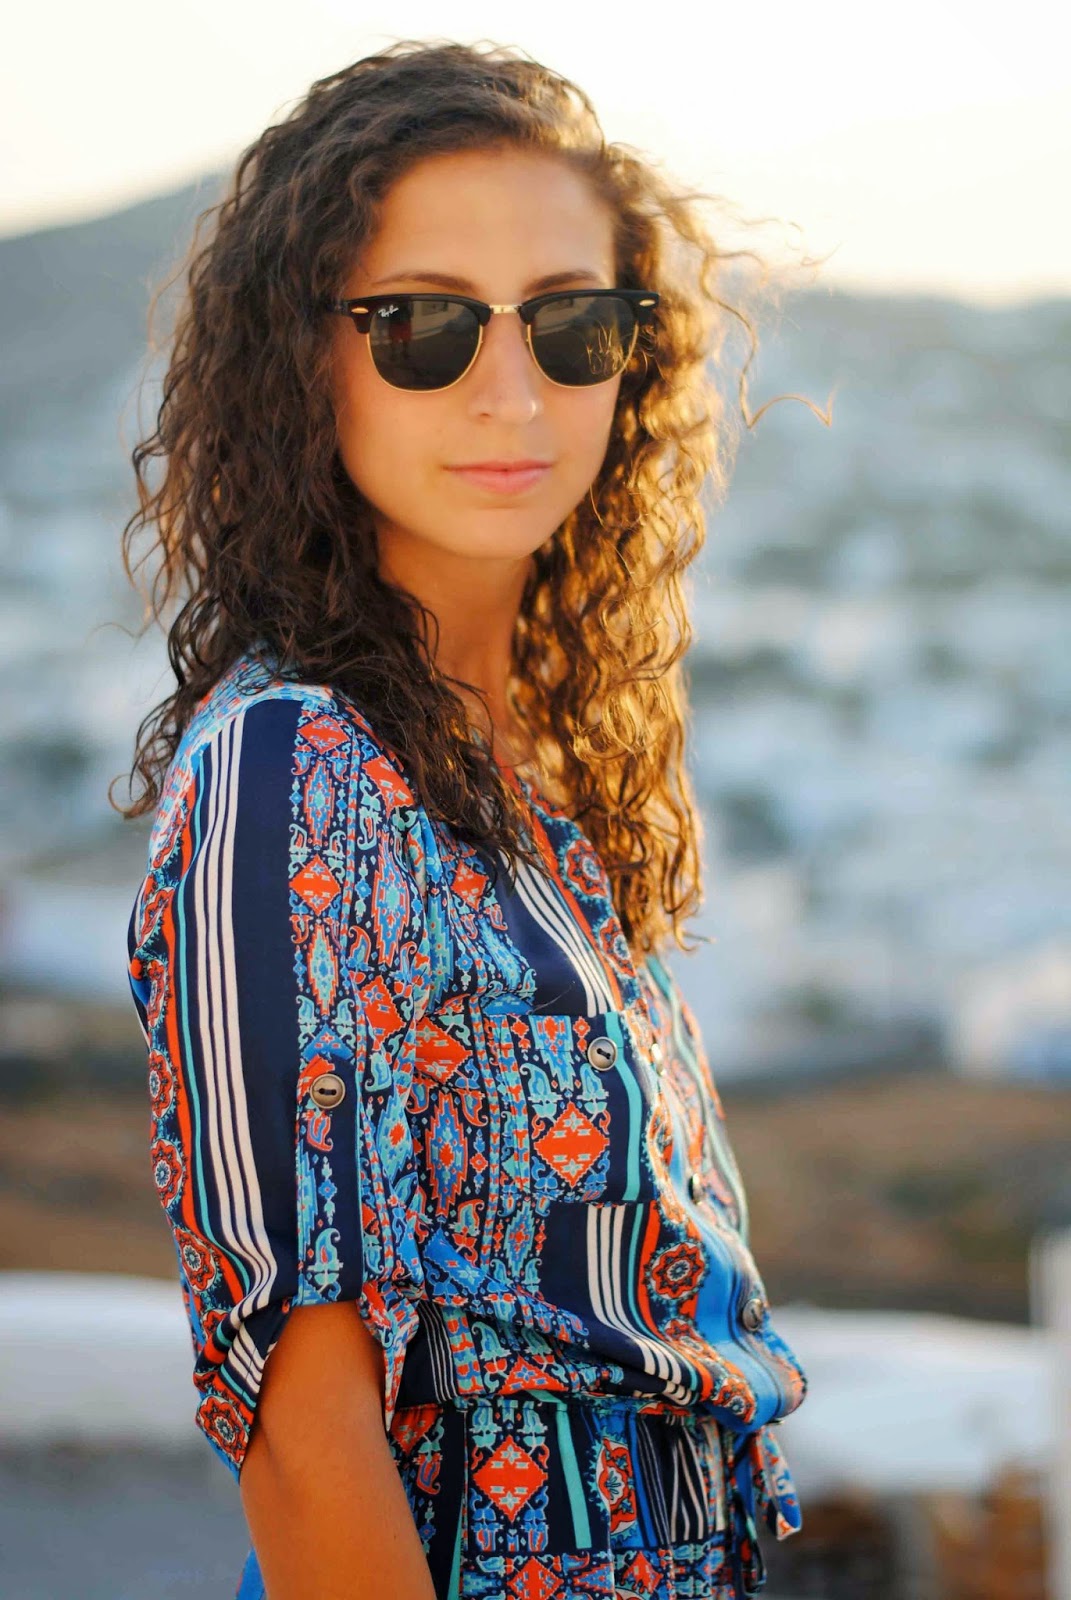 mykonos greece blue paisley romper ray ban clubmaster curly hair